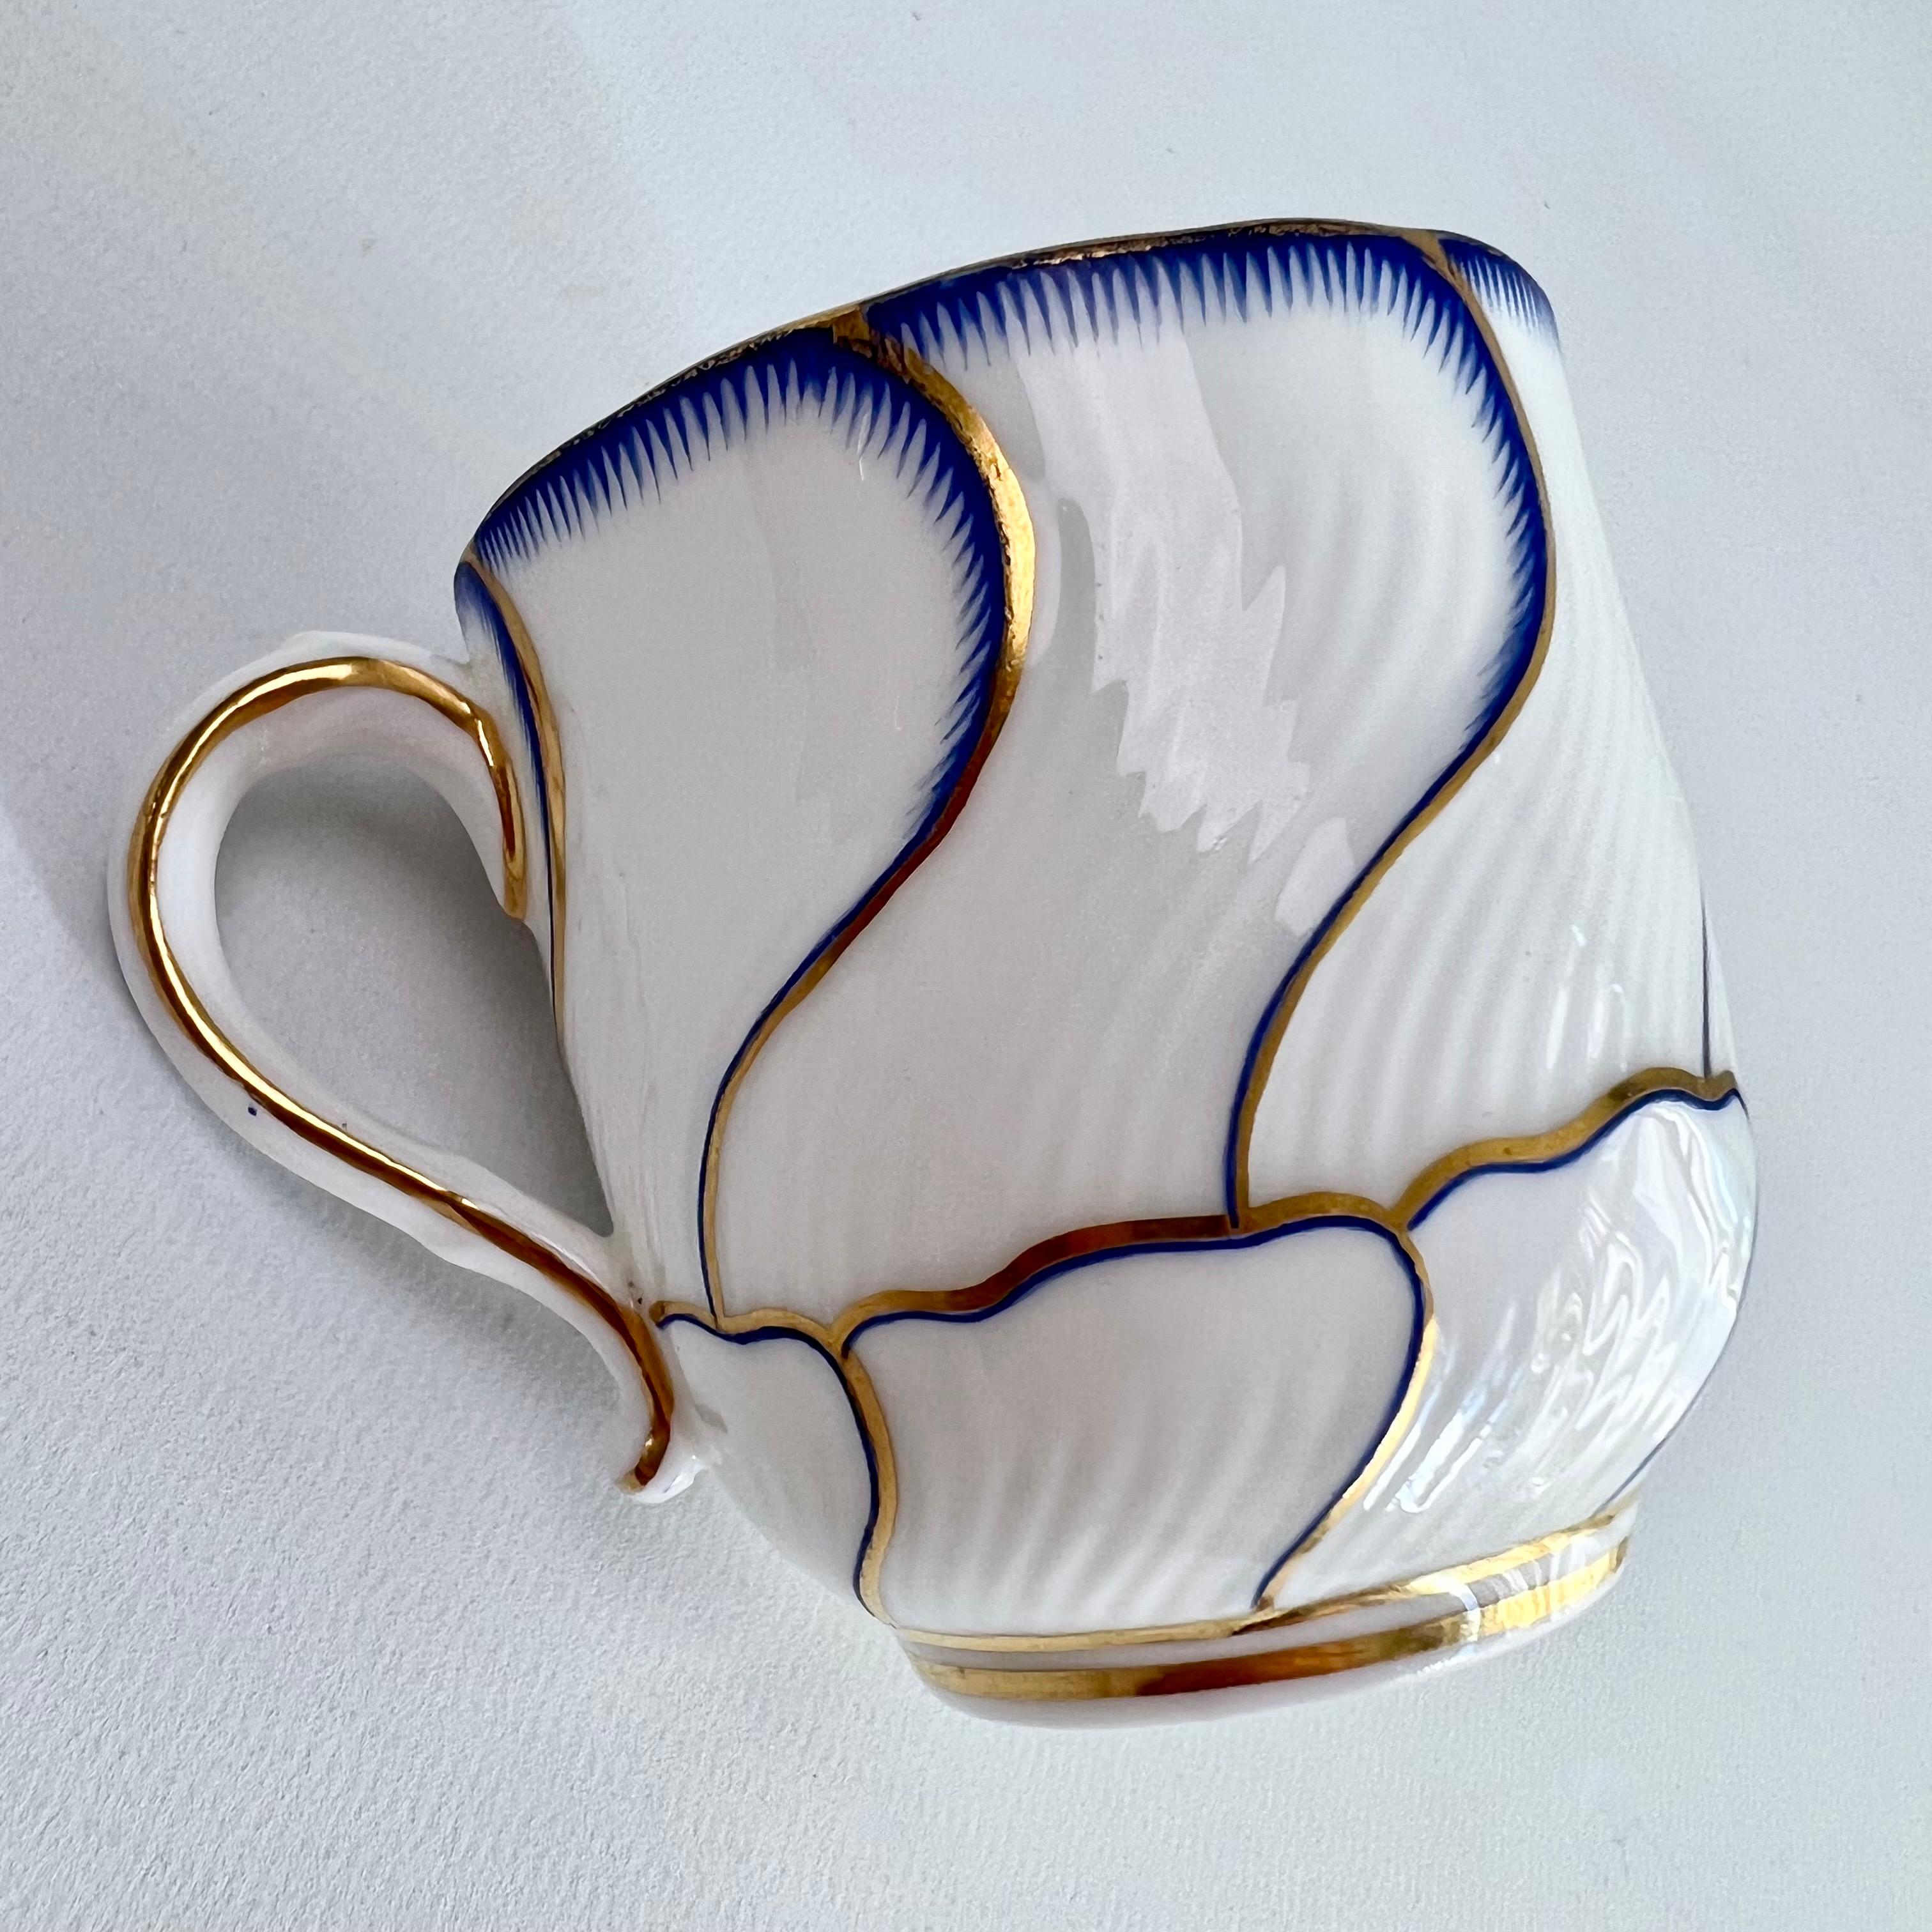 Porcelain Minton Orphaned Coffee Cup, Spiral Fluted with Blue and Gilt, Victorian ca 1881